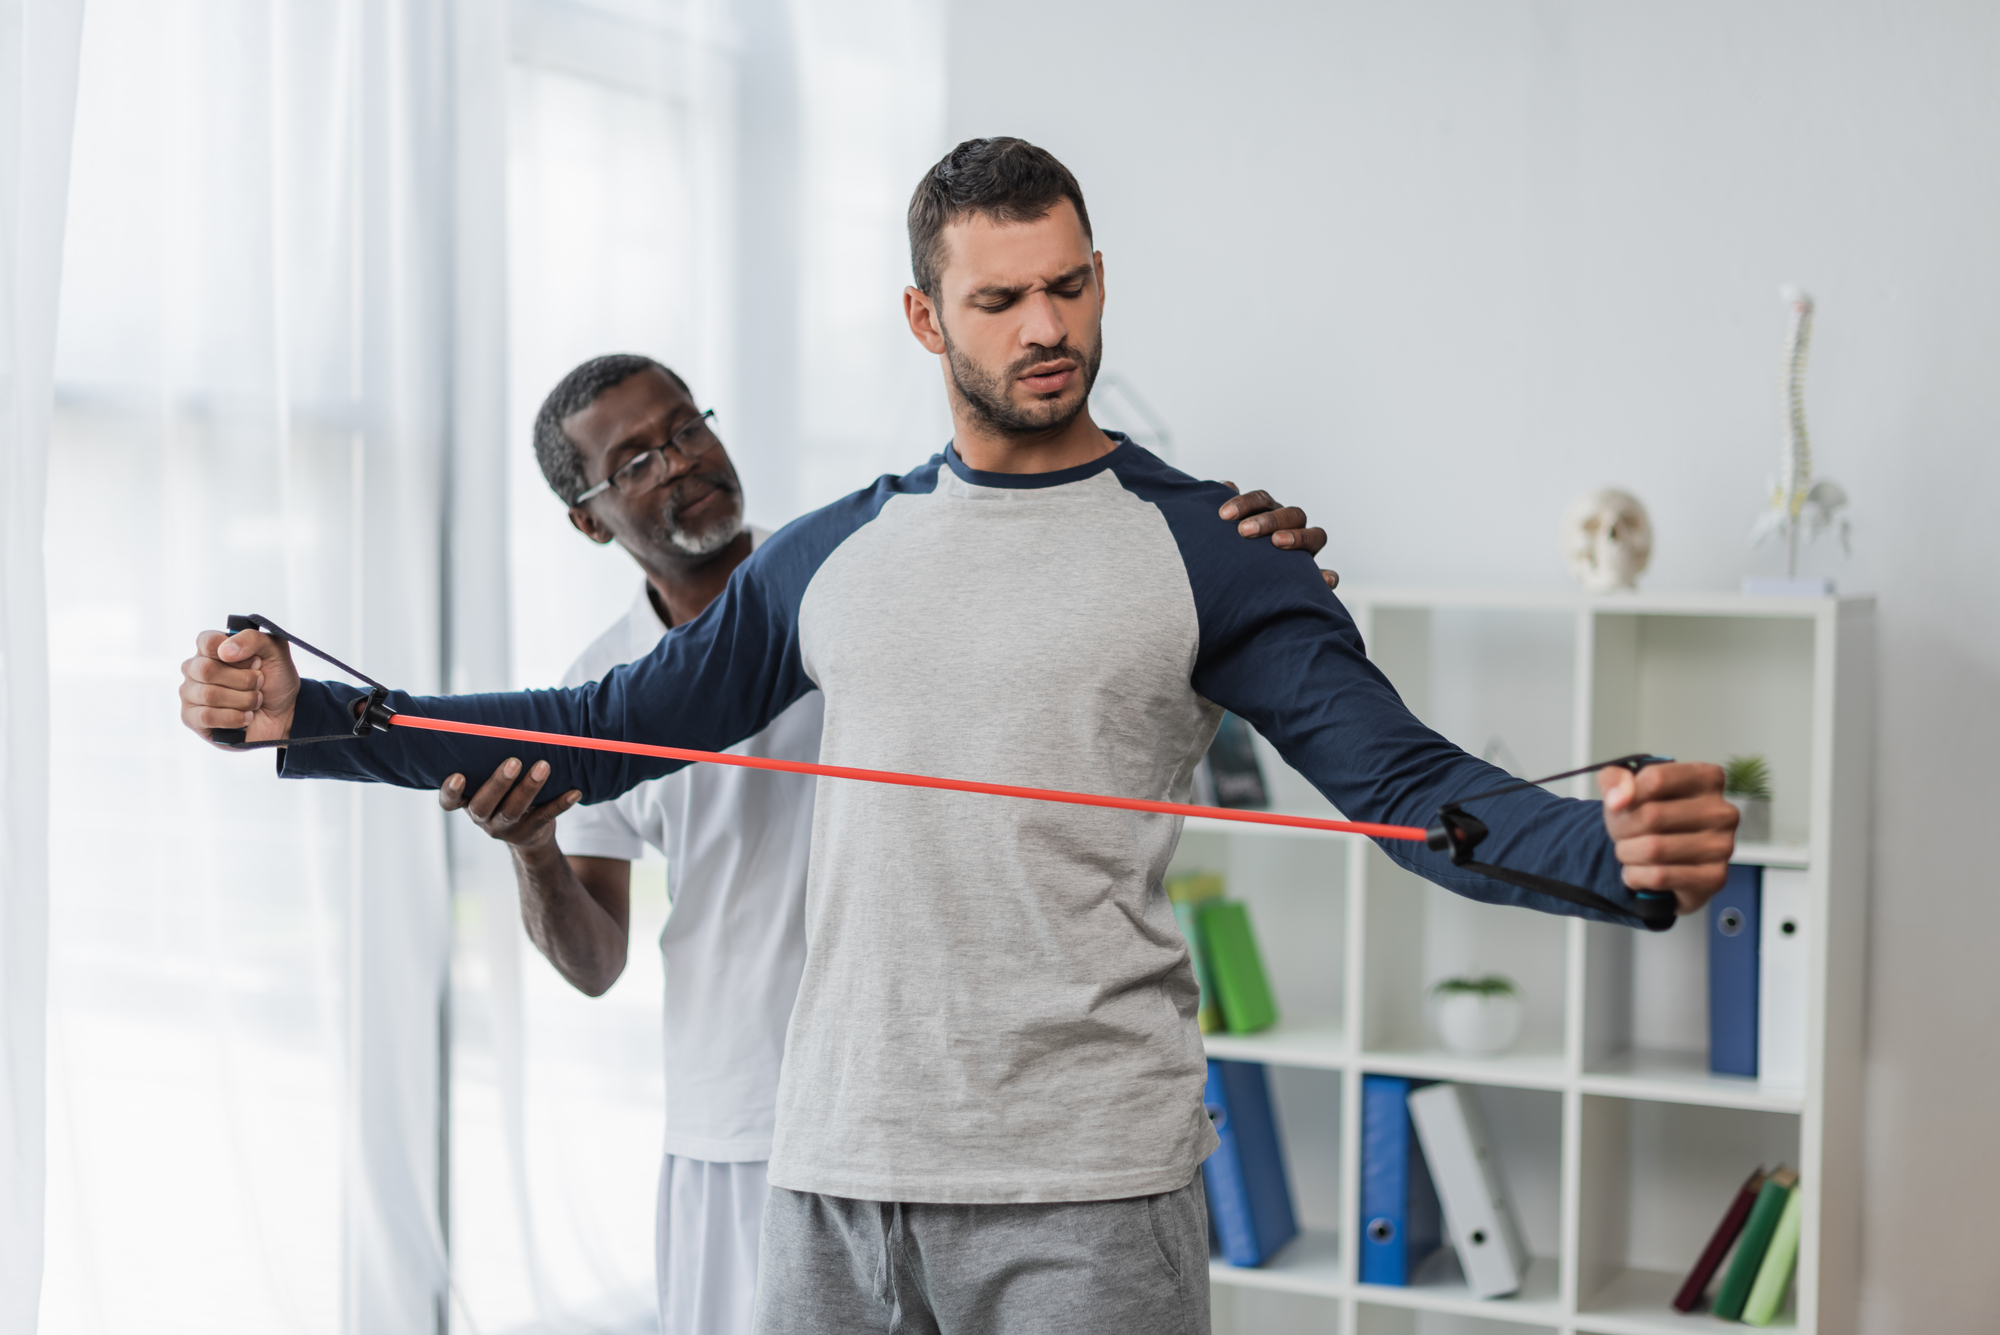 Resistance bands used in physical therapy